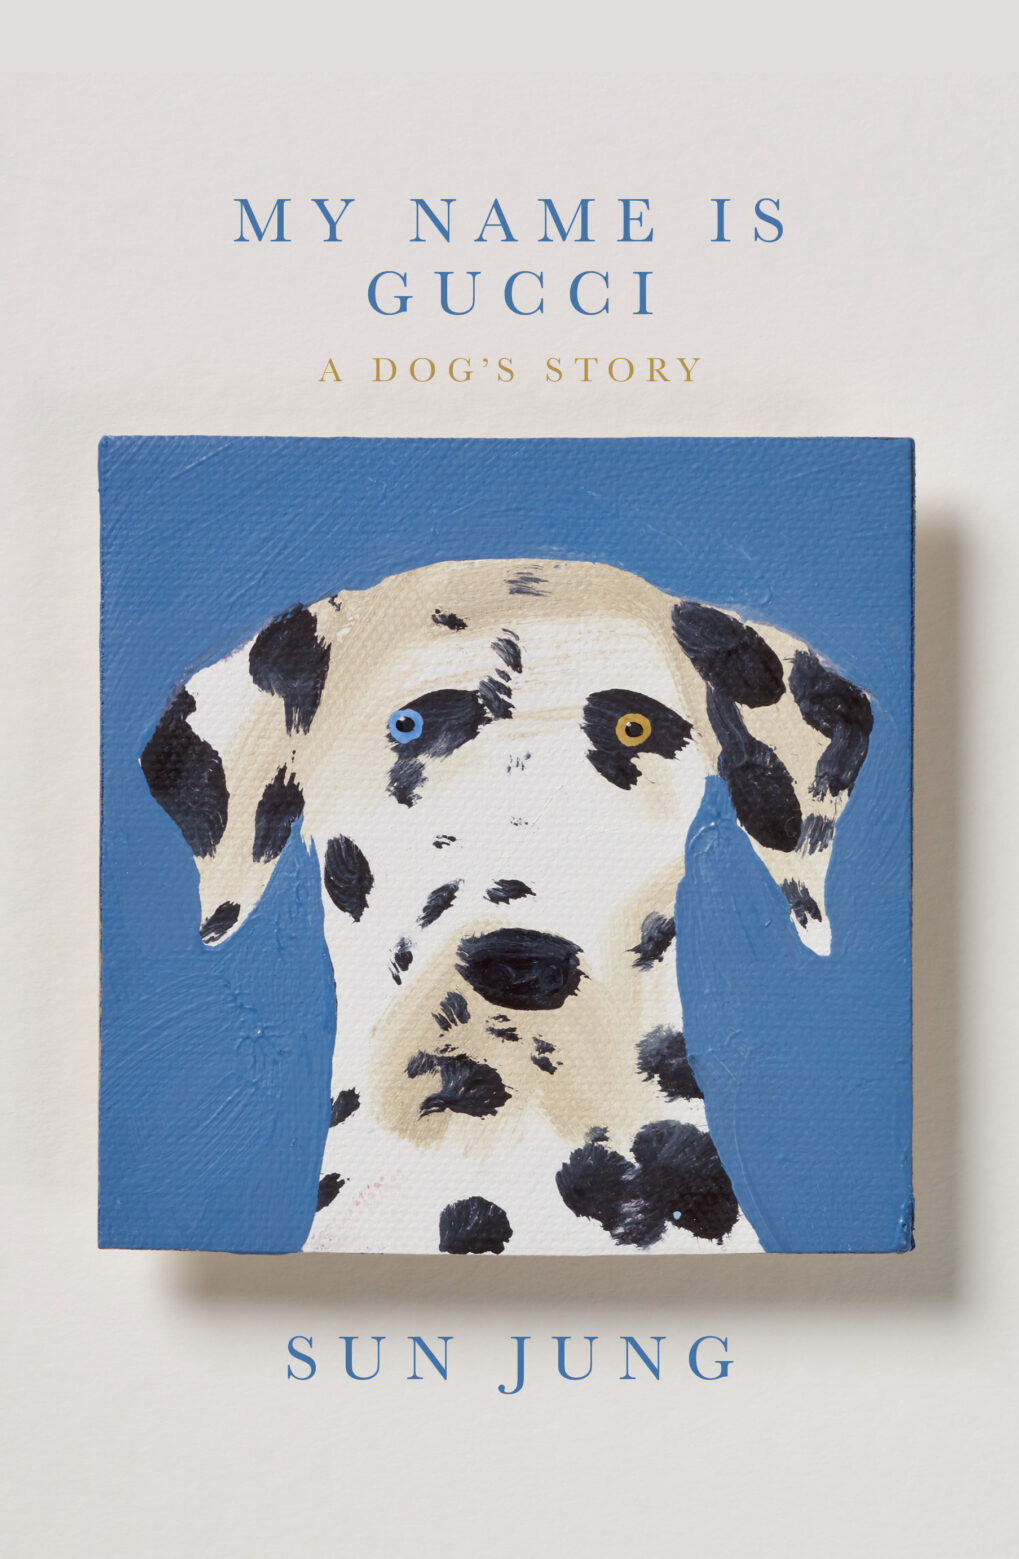 My Name Is Gucci: A Dog's Story